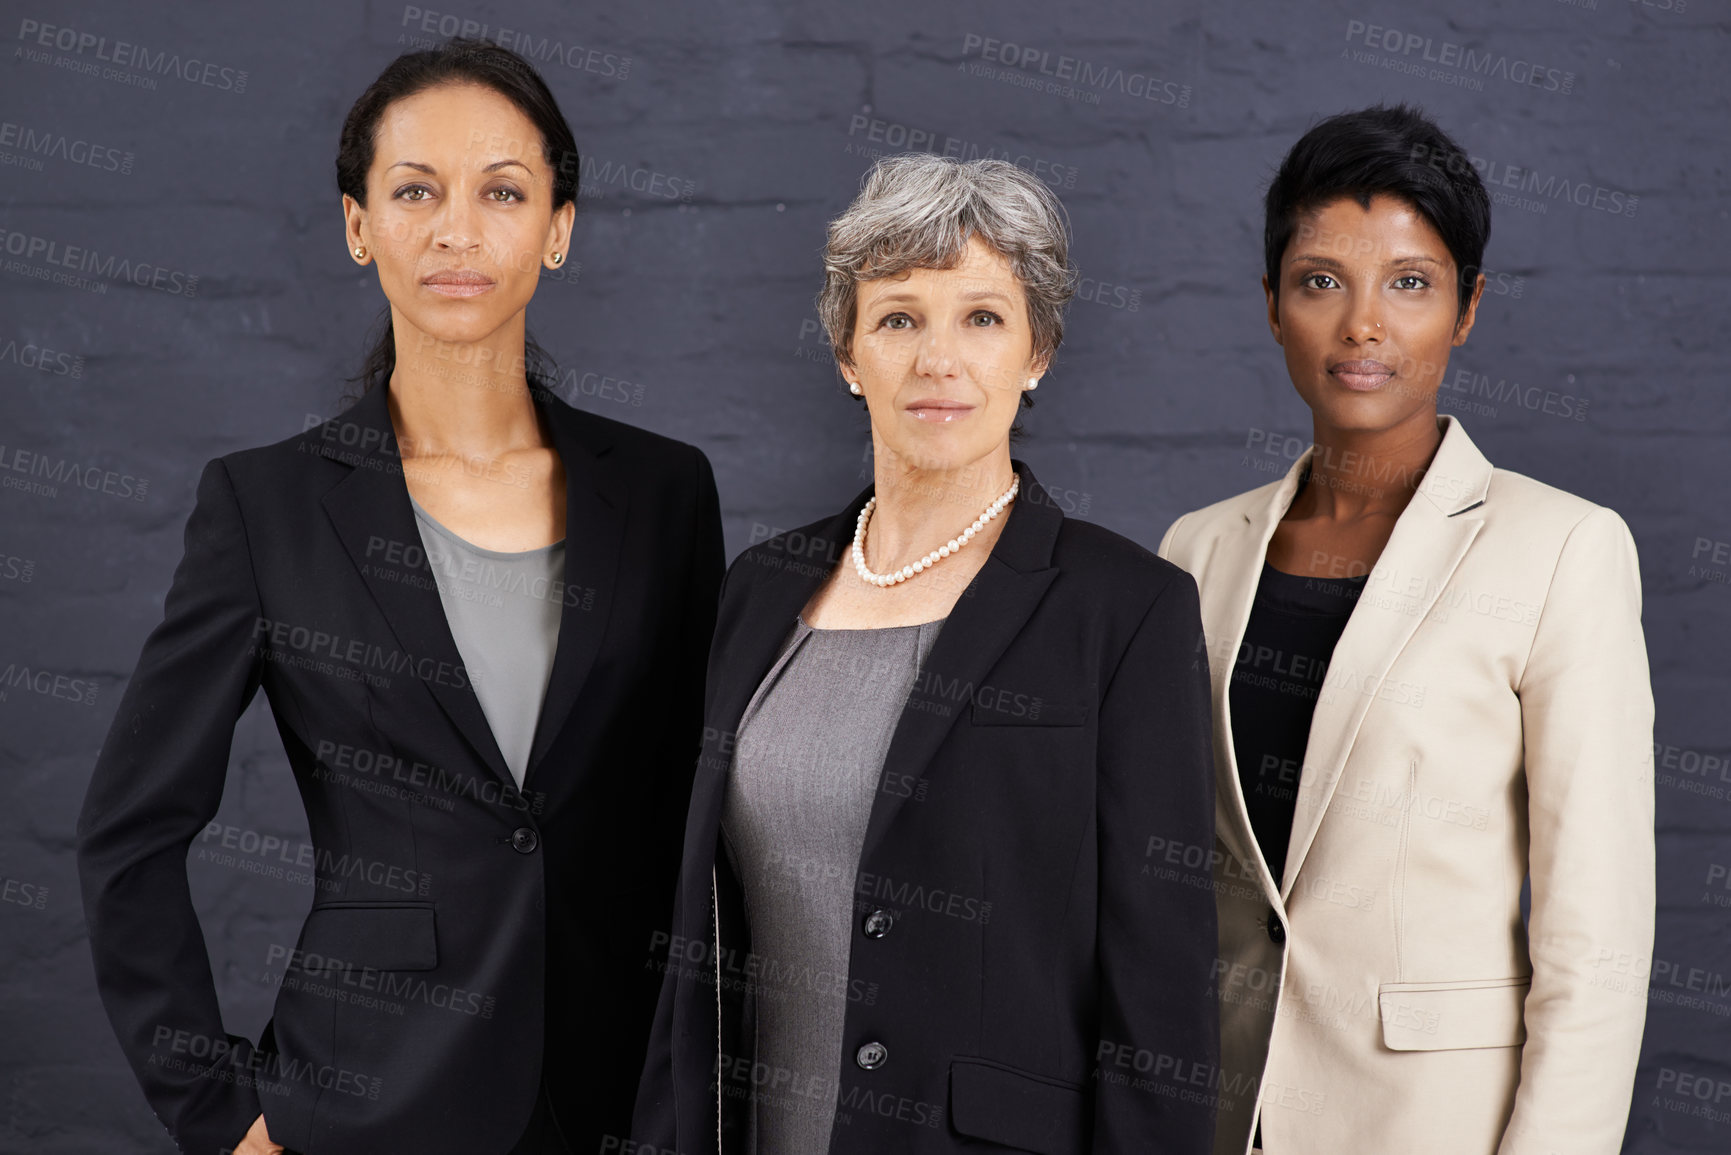 Buy stock photo Partnership, team and portrait of business women with diversity, confidence and assertive in corporate career. People, management and leadership together for job in banking, finance or investment